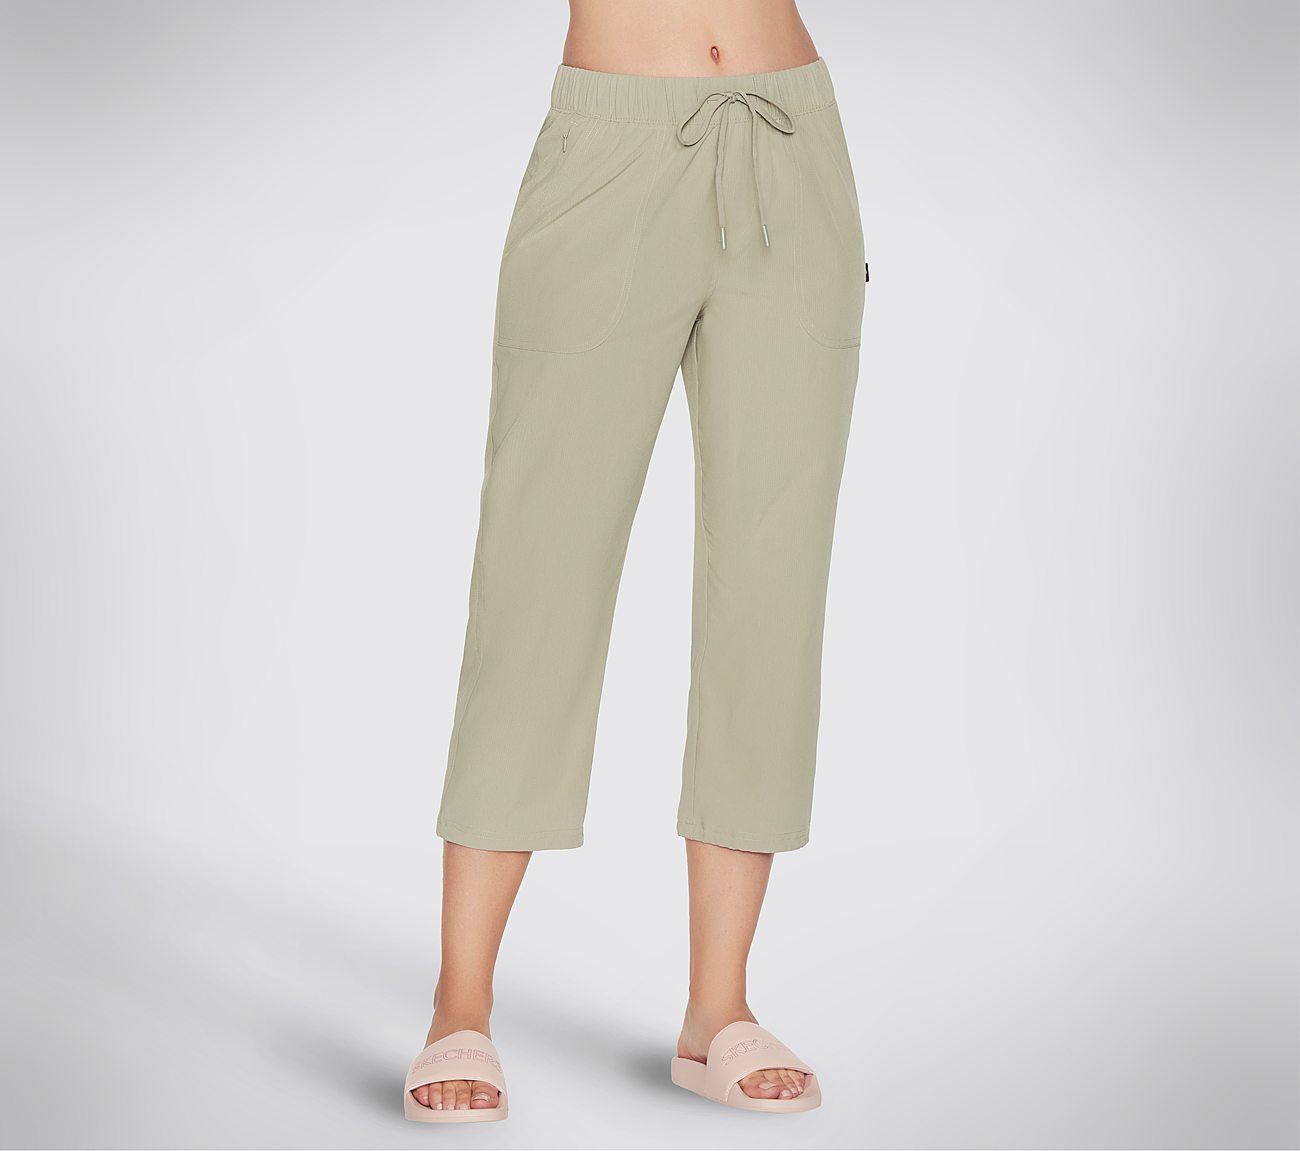 INCLINE MIDCALF PANT, GREEN/WHITE Apparel Lateral View